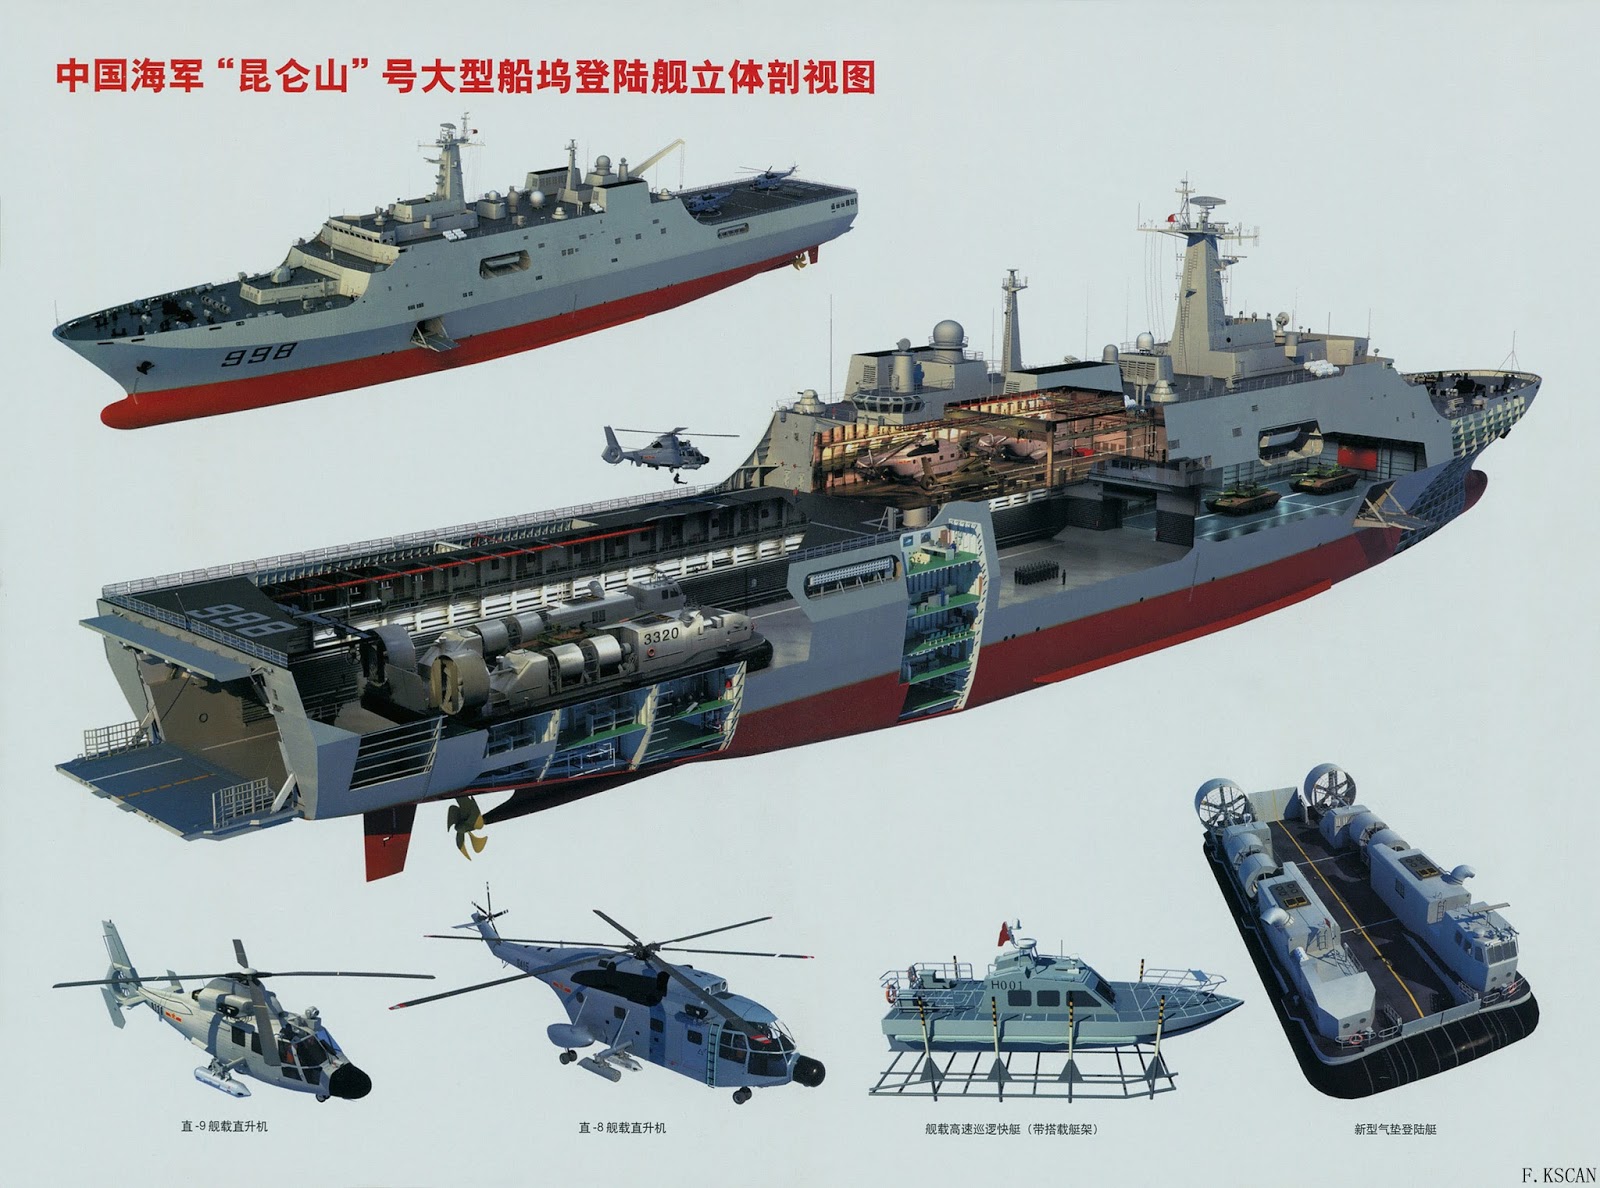 china+Type+071+amphibious+transport+dock%252C+or+landing+platform+dock+%2528LPD%2529++Type+071+%2528Yuzhao-class%2529+are+amphibious+warfare+ships+of+the+People%2527s+Republic+of+China%2527s+People%2527s+Liberation+Army+Navy+%25281%2529.jpg